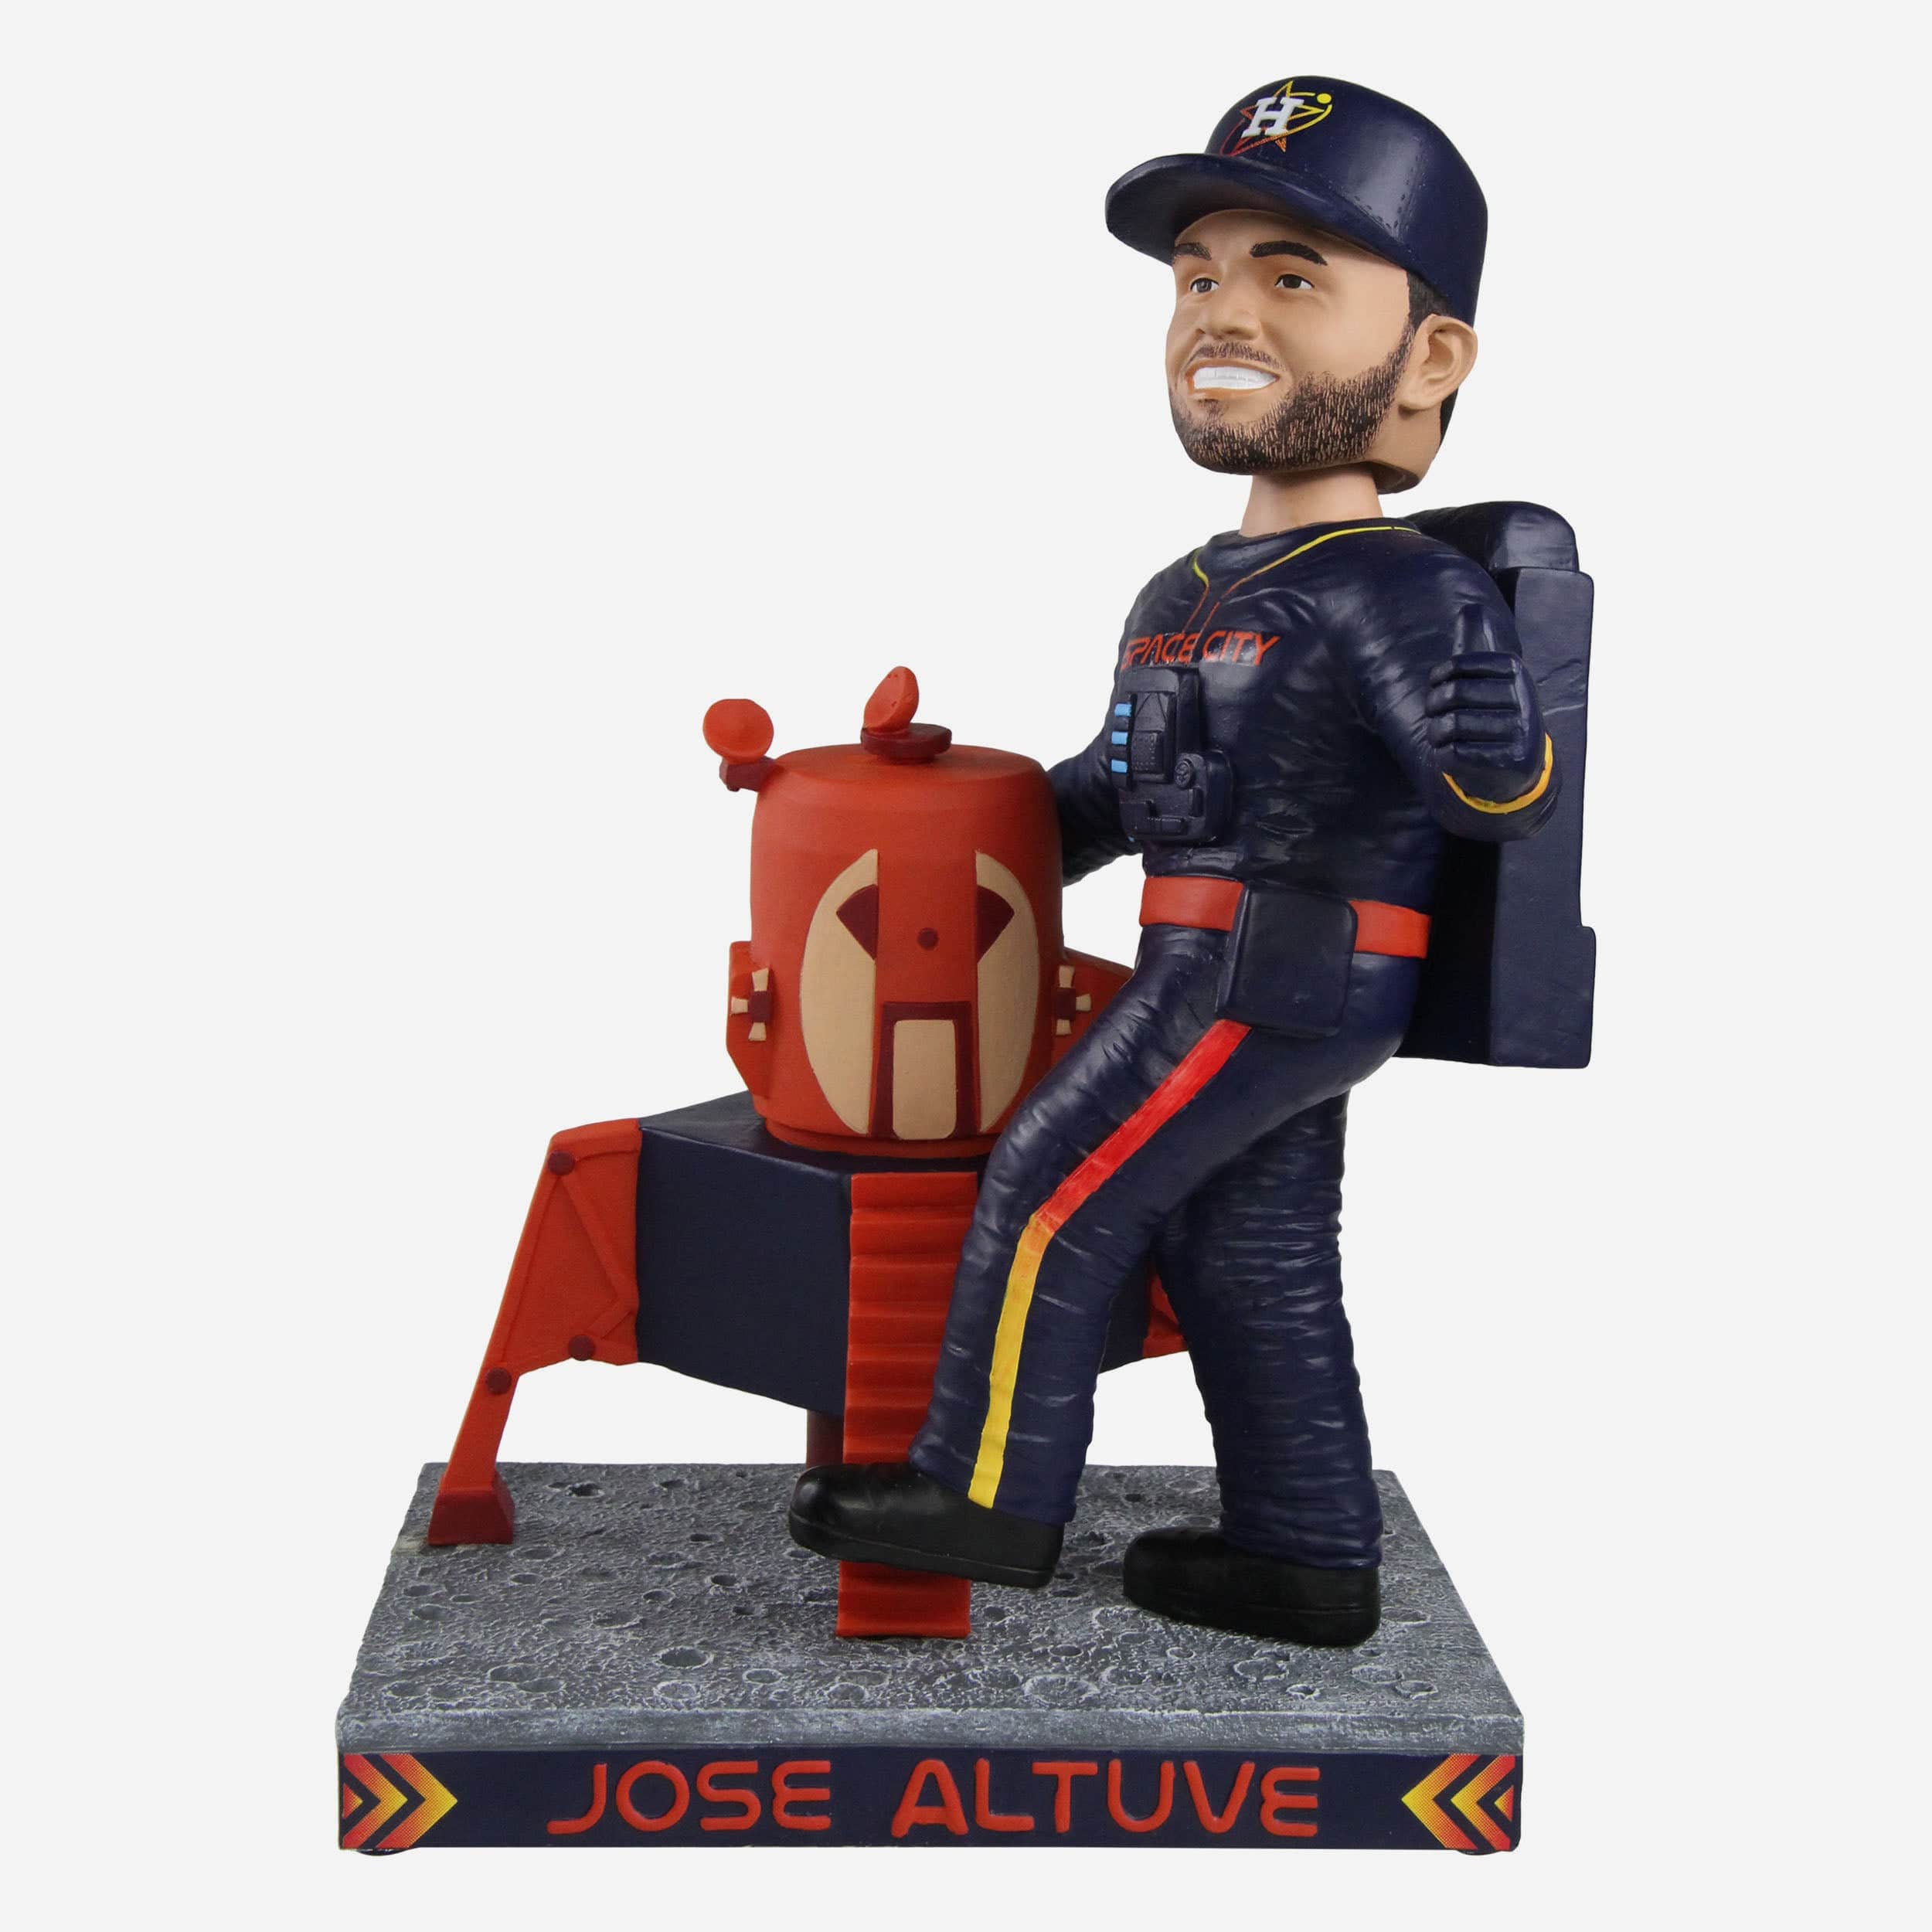 Life in the winter leagues, Altuve bobblehead and López's road to MLB